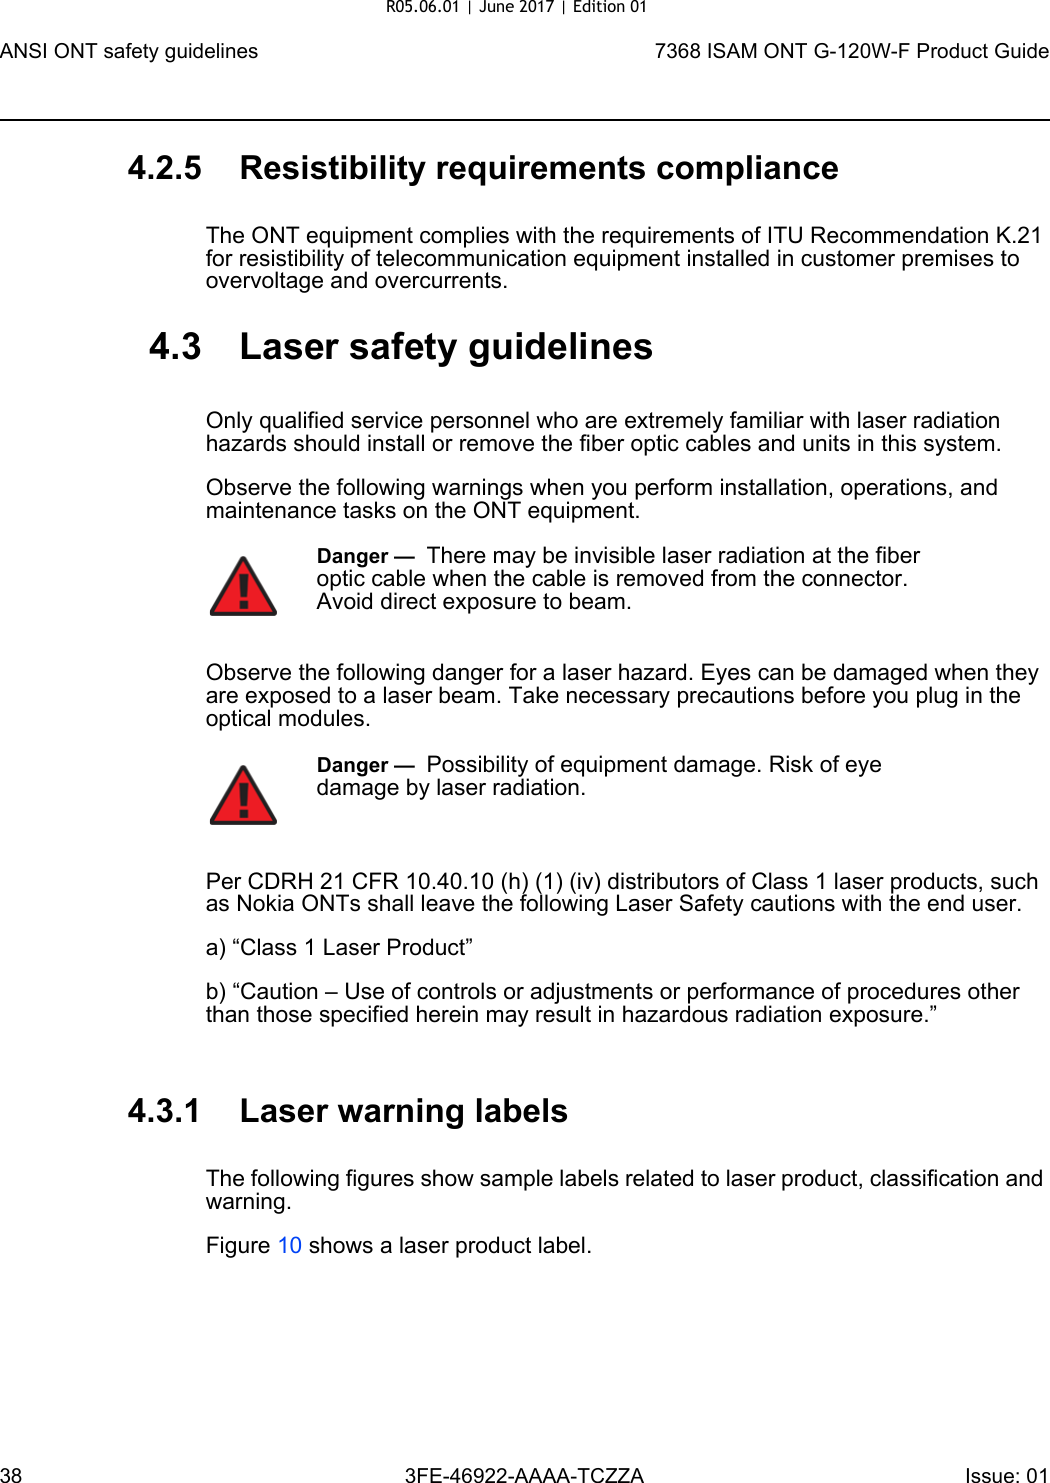 ANSI ONT safety guidelines387368 ISAM ONT G-120W-F Product Guide3FE-46922-AAAA-TCZZA Issue: 01 4.2.5 Resistibility requirements complianceThe ONT equipment complies with the requirements of ITU Recommendation K.21 for resistibility of telecommunication equipment installed in customer premises to overvoltage and overcurrents.4.3 Laser safety guidelinesOnly qualified service personnel who are extremely familiar with laser radiation hazards should install or remove the fiber optic cables and units in this system.Observe the following warnings when you perform installation, operations, and maintenance tasks on the ONT equipment.Observe the following danger for a laser hazard. Eyes can be damaged when they are exposed to a laser beam. Take necessary precautions before you plug in the optical modules.Per CDRH 21 CFR 10.40.10 (h) (1) (iv) distributors of Class 1 laser products, such as Nokia ONTs shall leave the following Laser Safety cautions with the end user.a) “Class 1 Laser Product”b) “Caution – Use of controls or adjustments or performance of procedures other than those specified herein may result in hazardous radiation exposure.”4.3.1 Laser warning labelsThe following figures show sample labels related to laser product, classification and warning. Figure 10 shows a laser product label.Danger —  There may be invisible laser radiation at the fiber optic cable when the cable is removed from the connector. Avoid direct exposure to beam.Danger —  Possibility of equipment damage. Risk of eye damage by laser radiation.R05.06.01 | June 2017 | Edition 01 